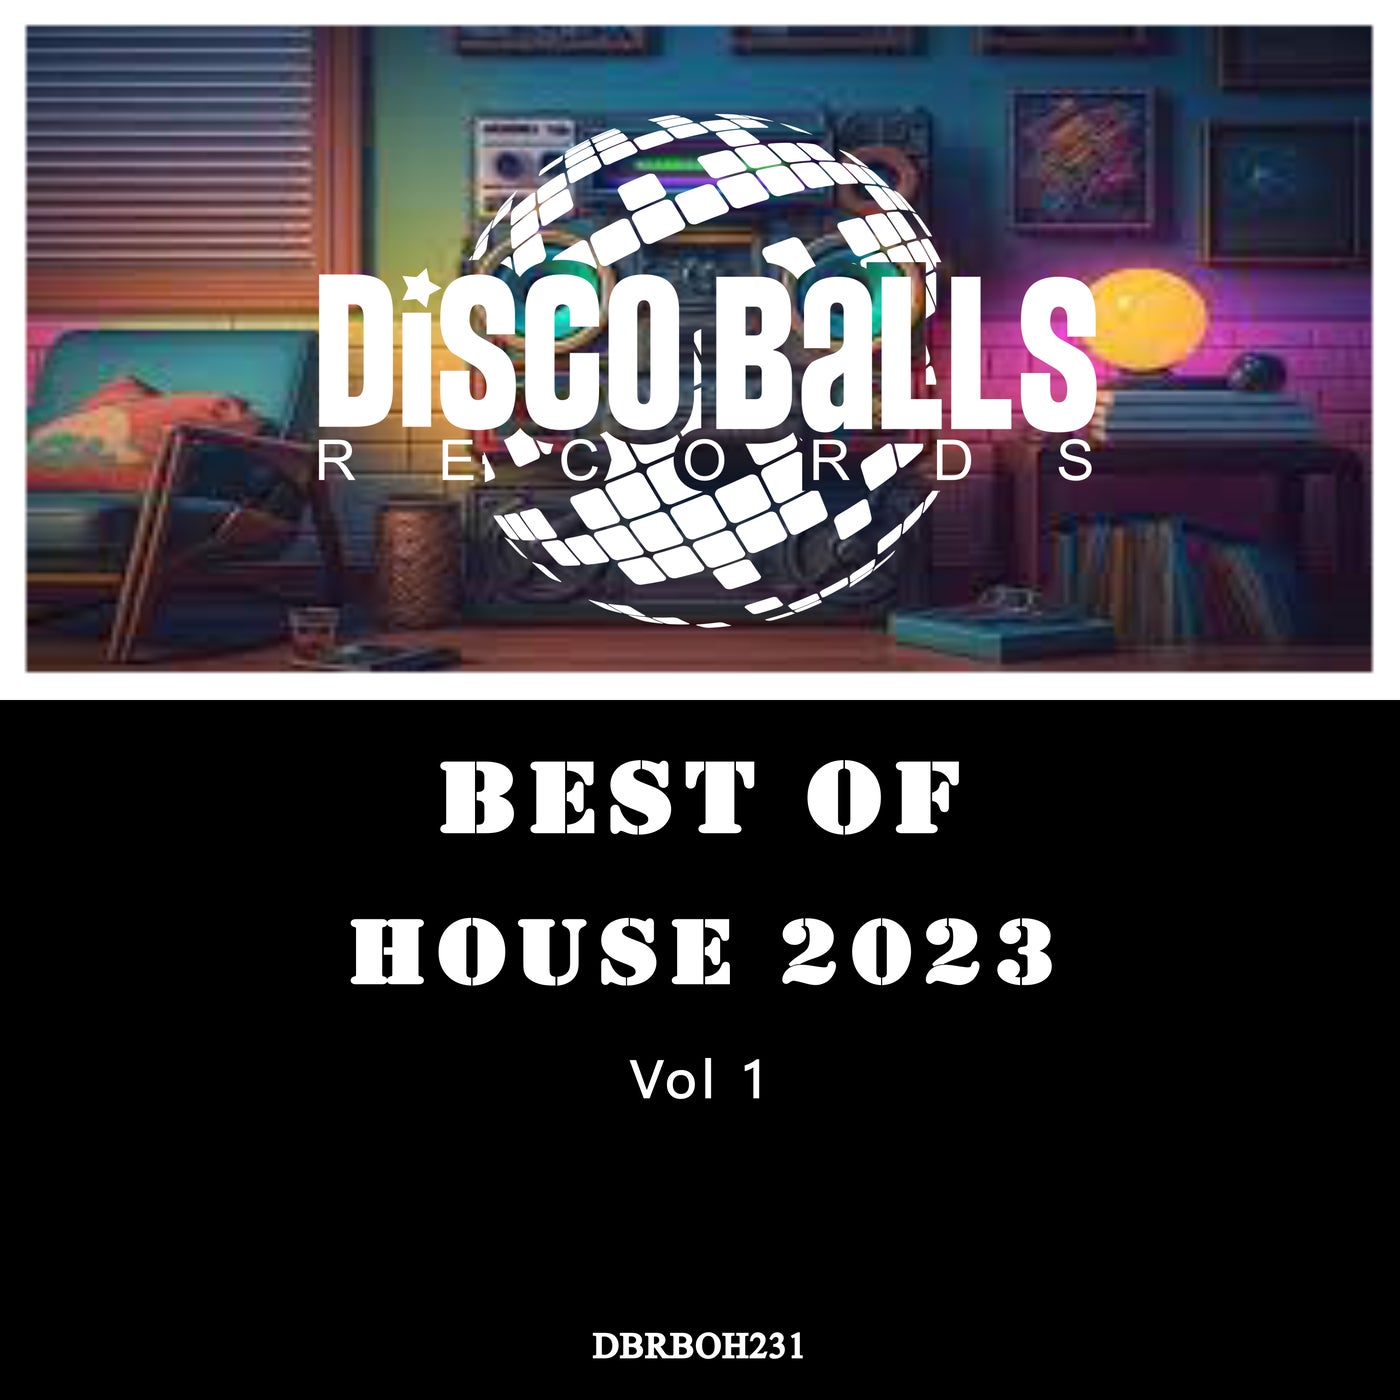 Best Of House 2023, Vol. 1